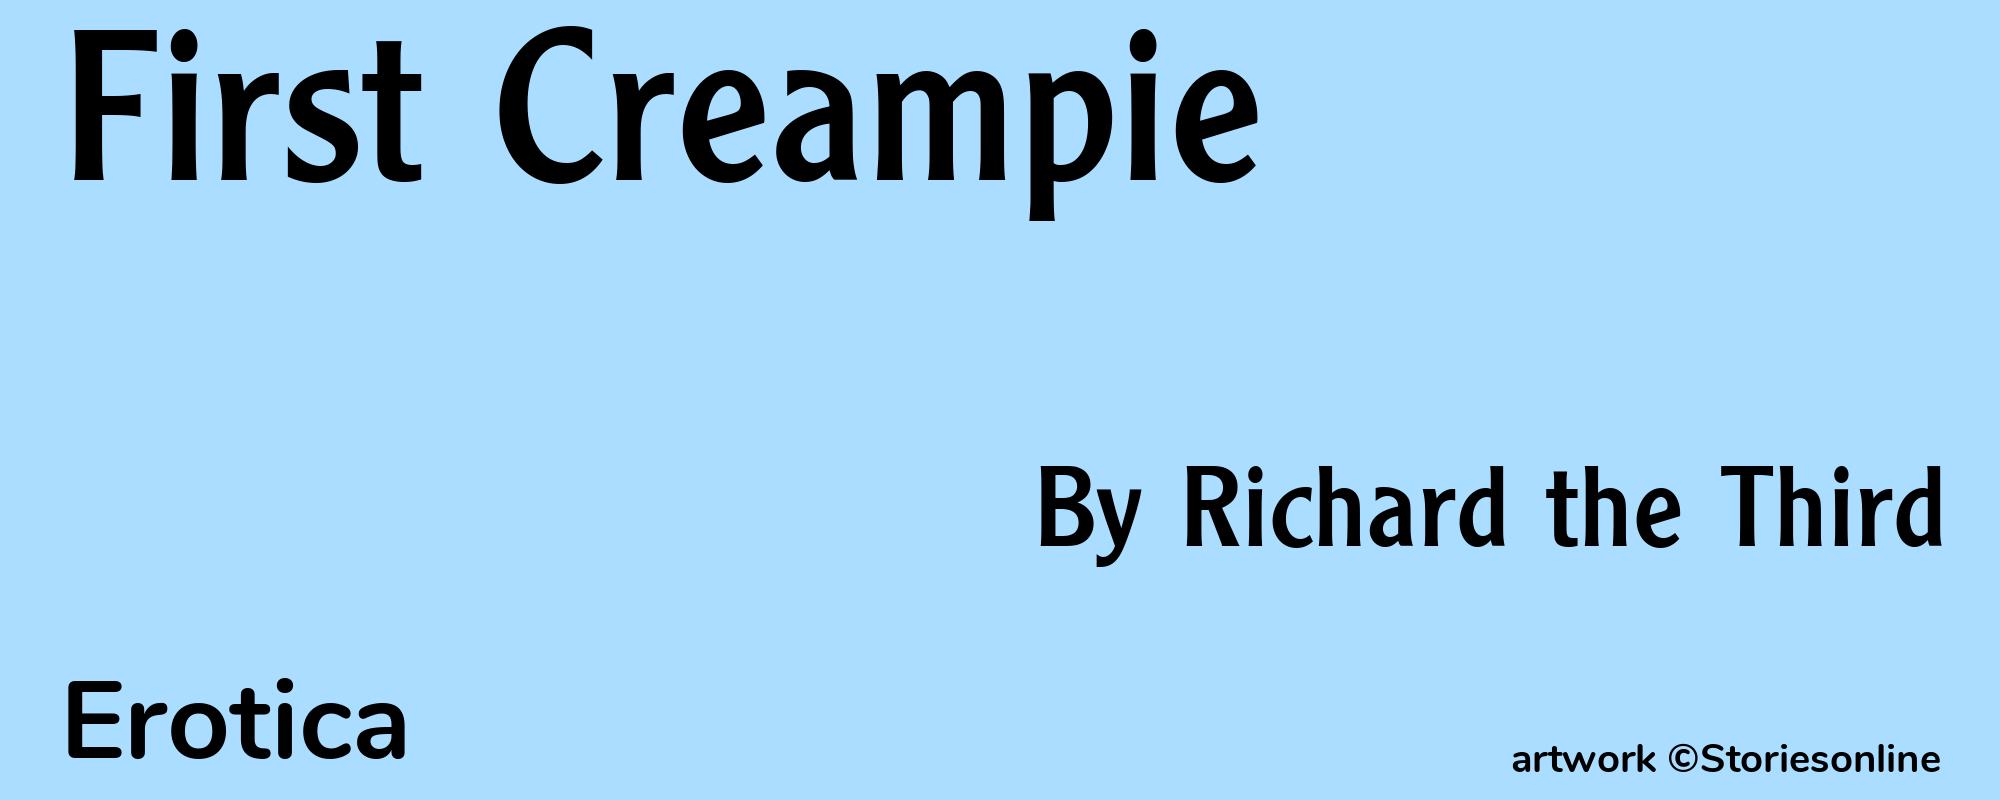 First Creampie - Cover